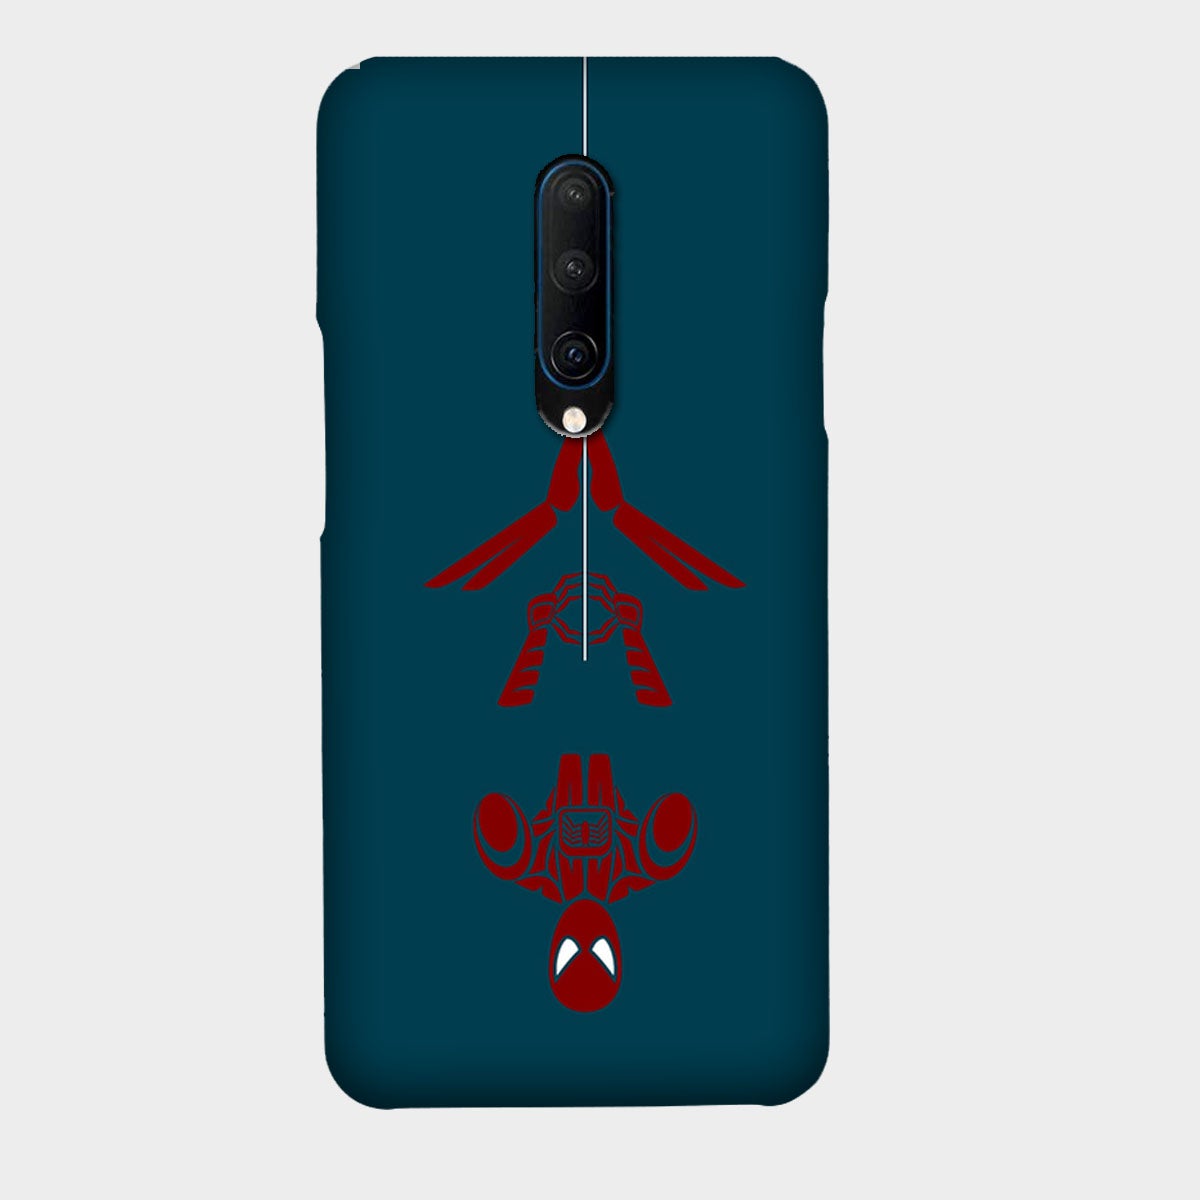 Spider Man - Upside - Mobile Phone Cover - Hard Case - OnePlus